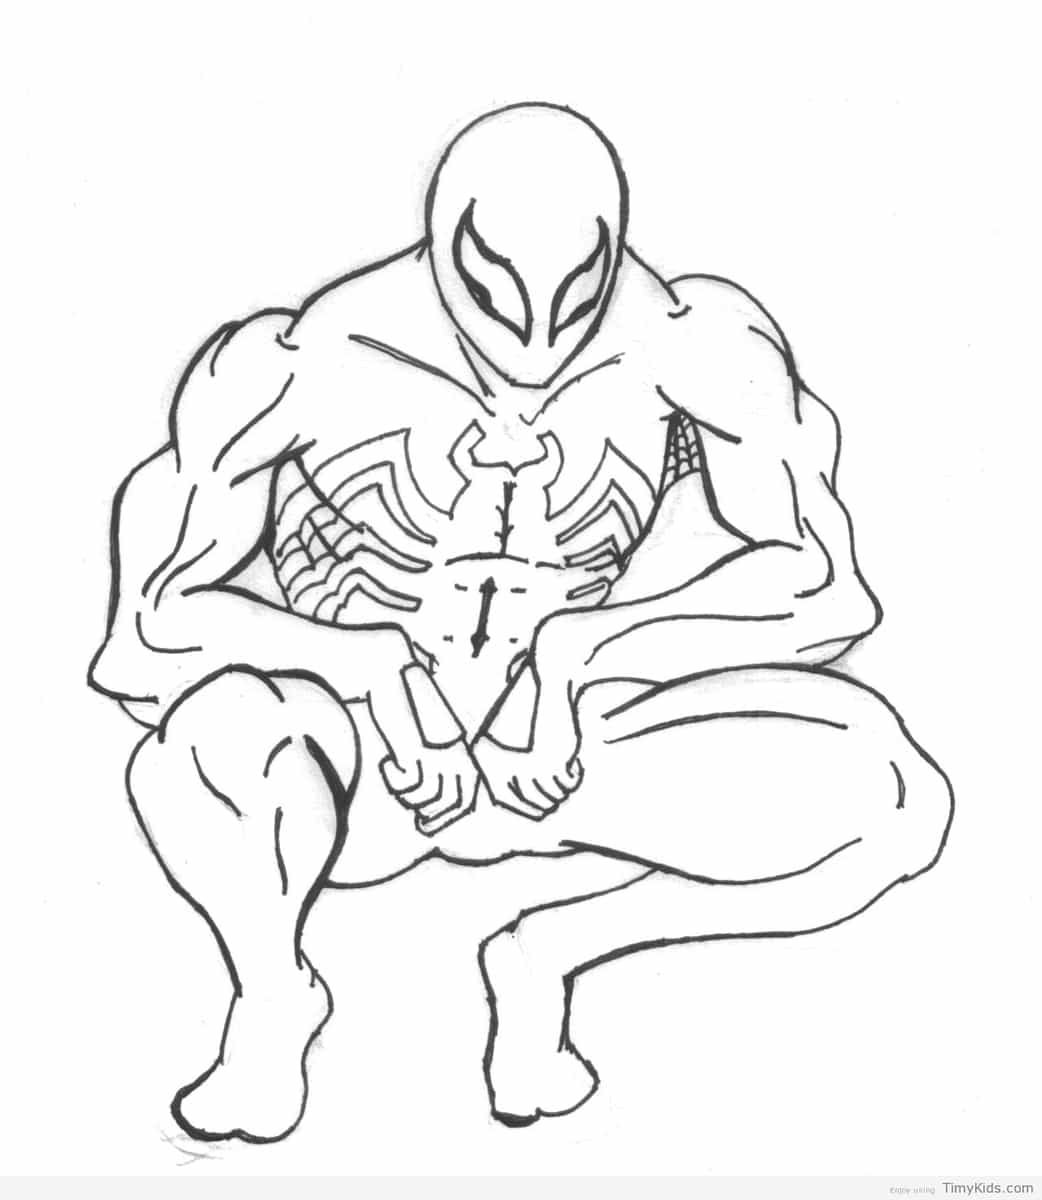 Spiderman Black Suit Coloring Pages at GetColorings.com ...